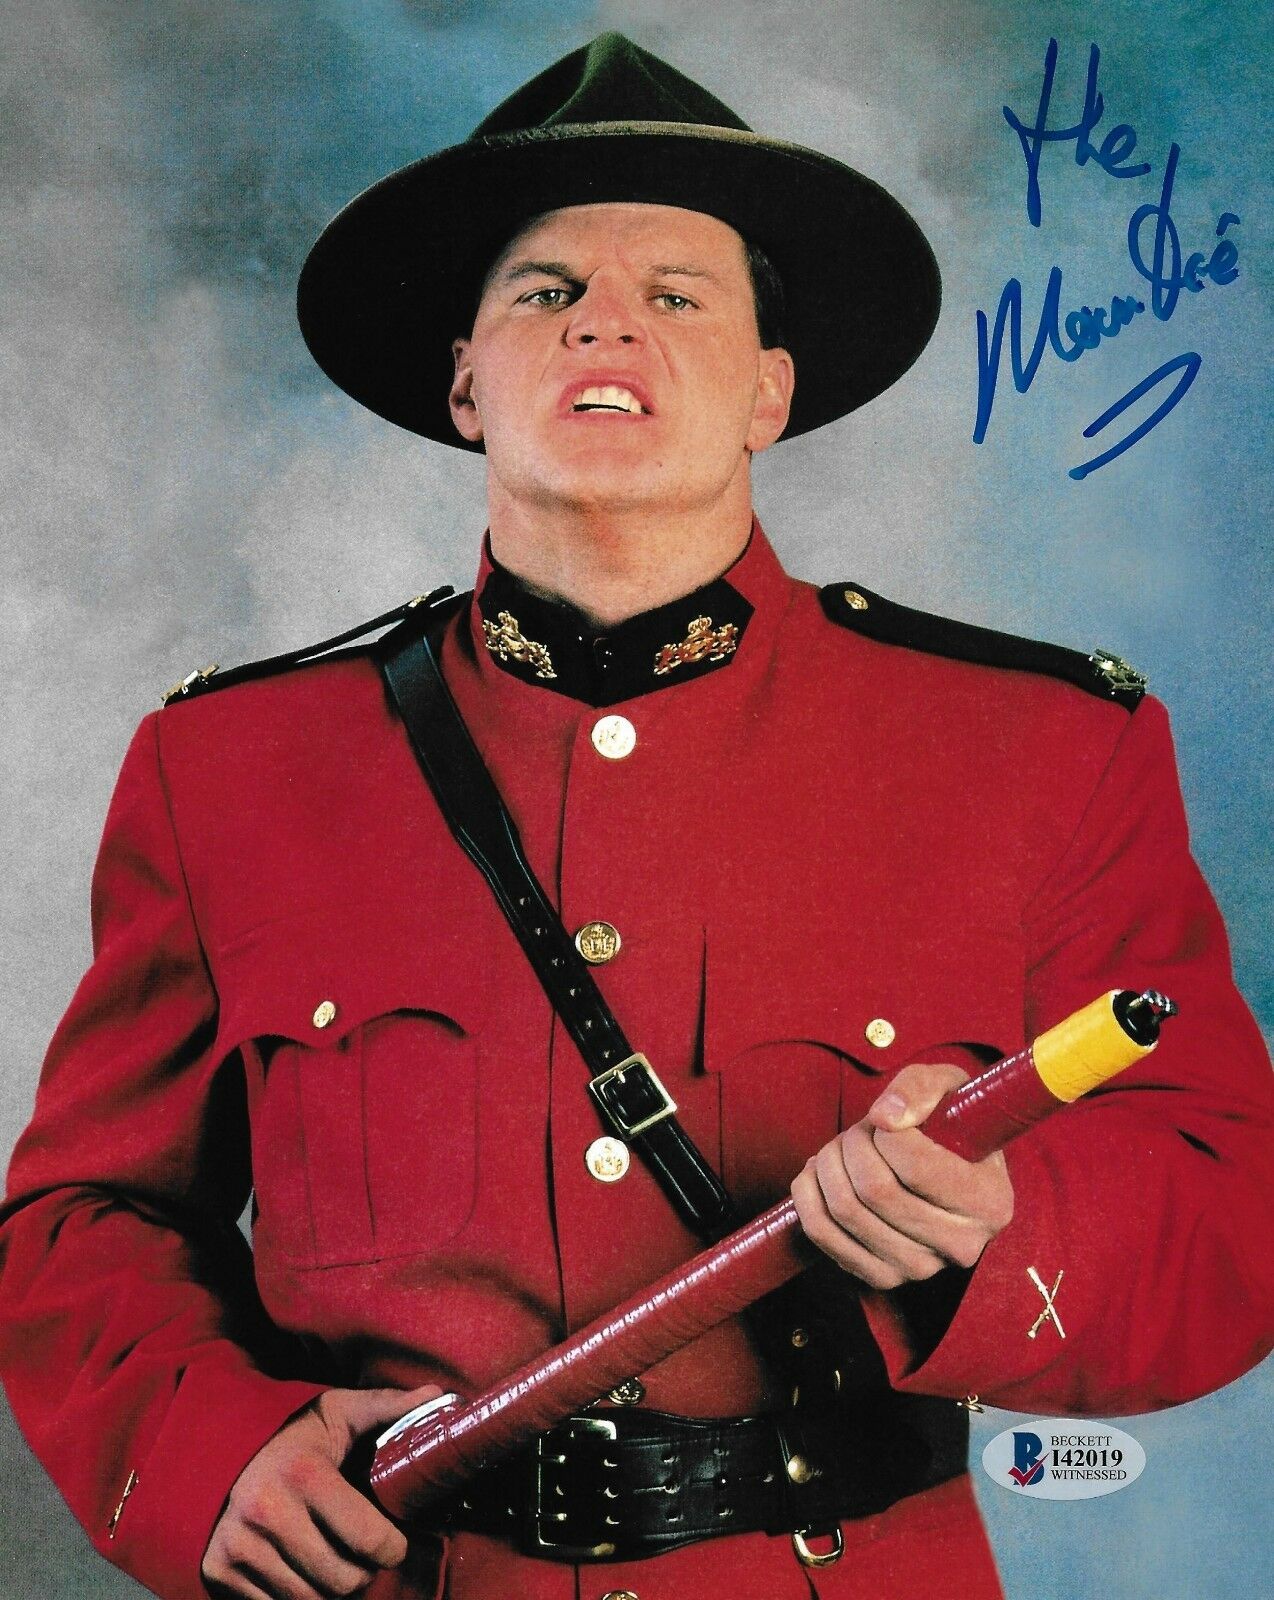 The Mountie Jacques Rougeau Signed 8x10 Photo BAS Beckett COA WWE Picture Auto'd